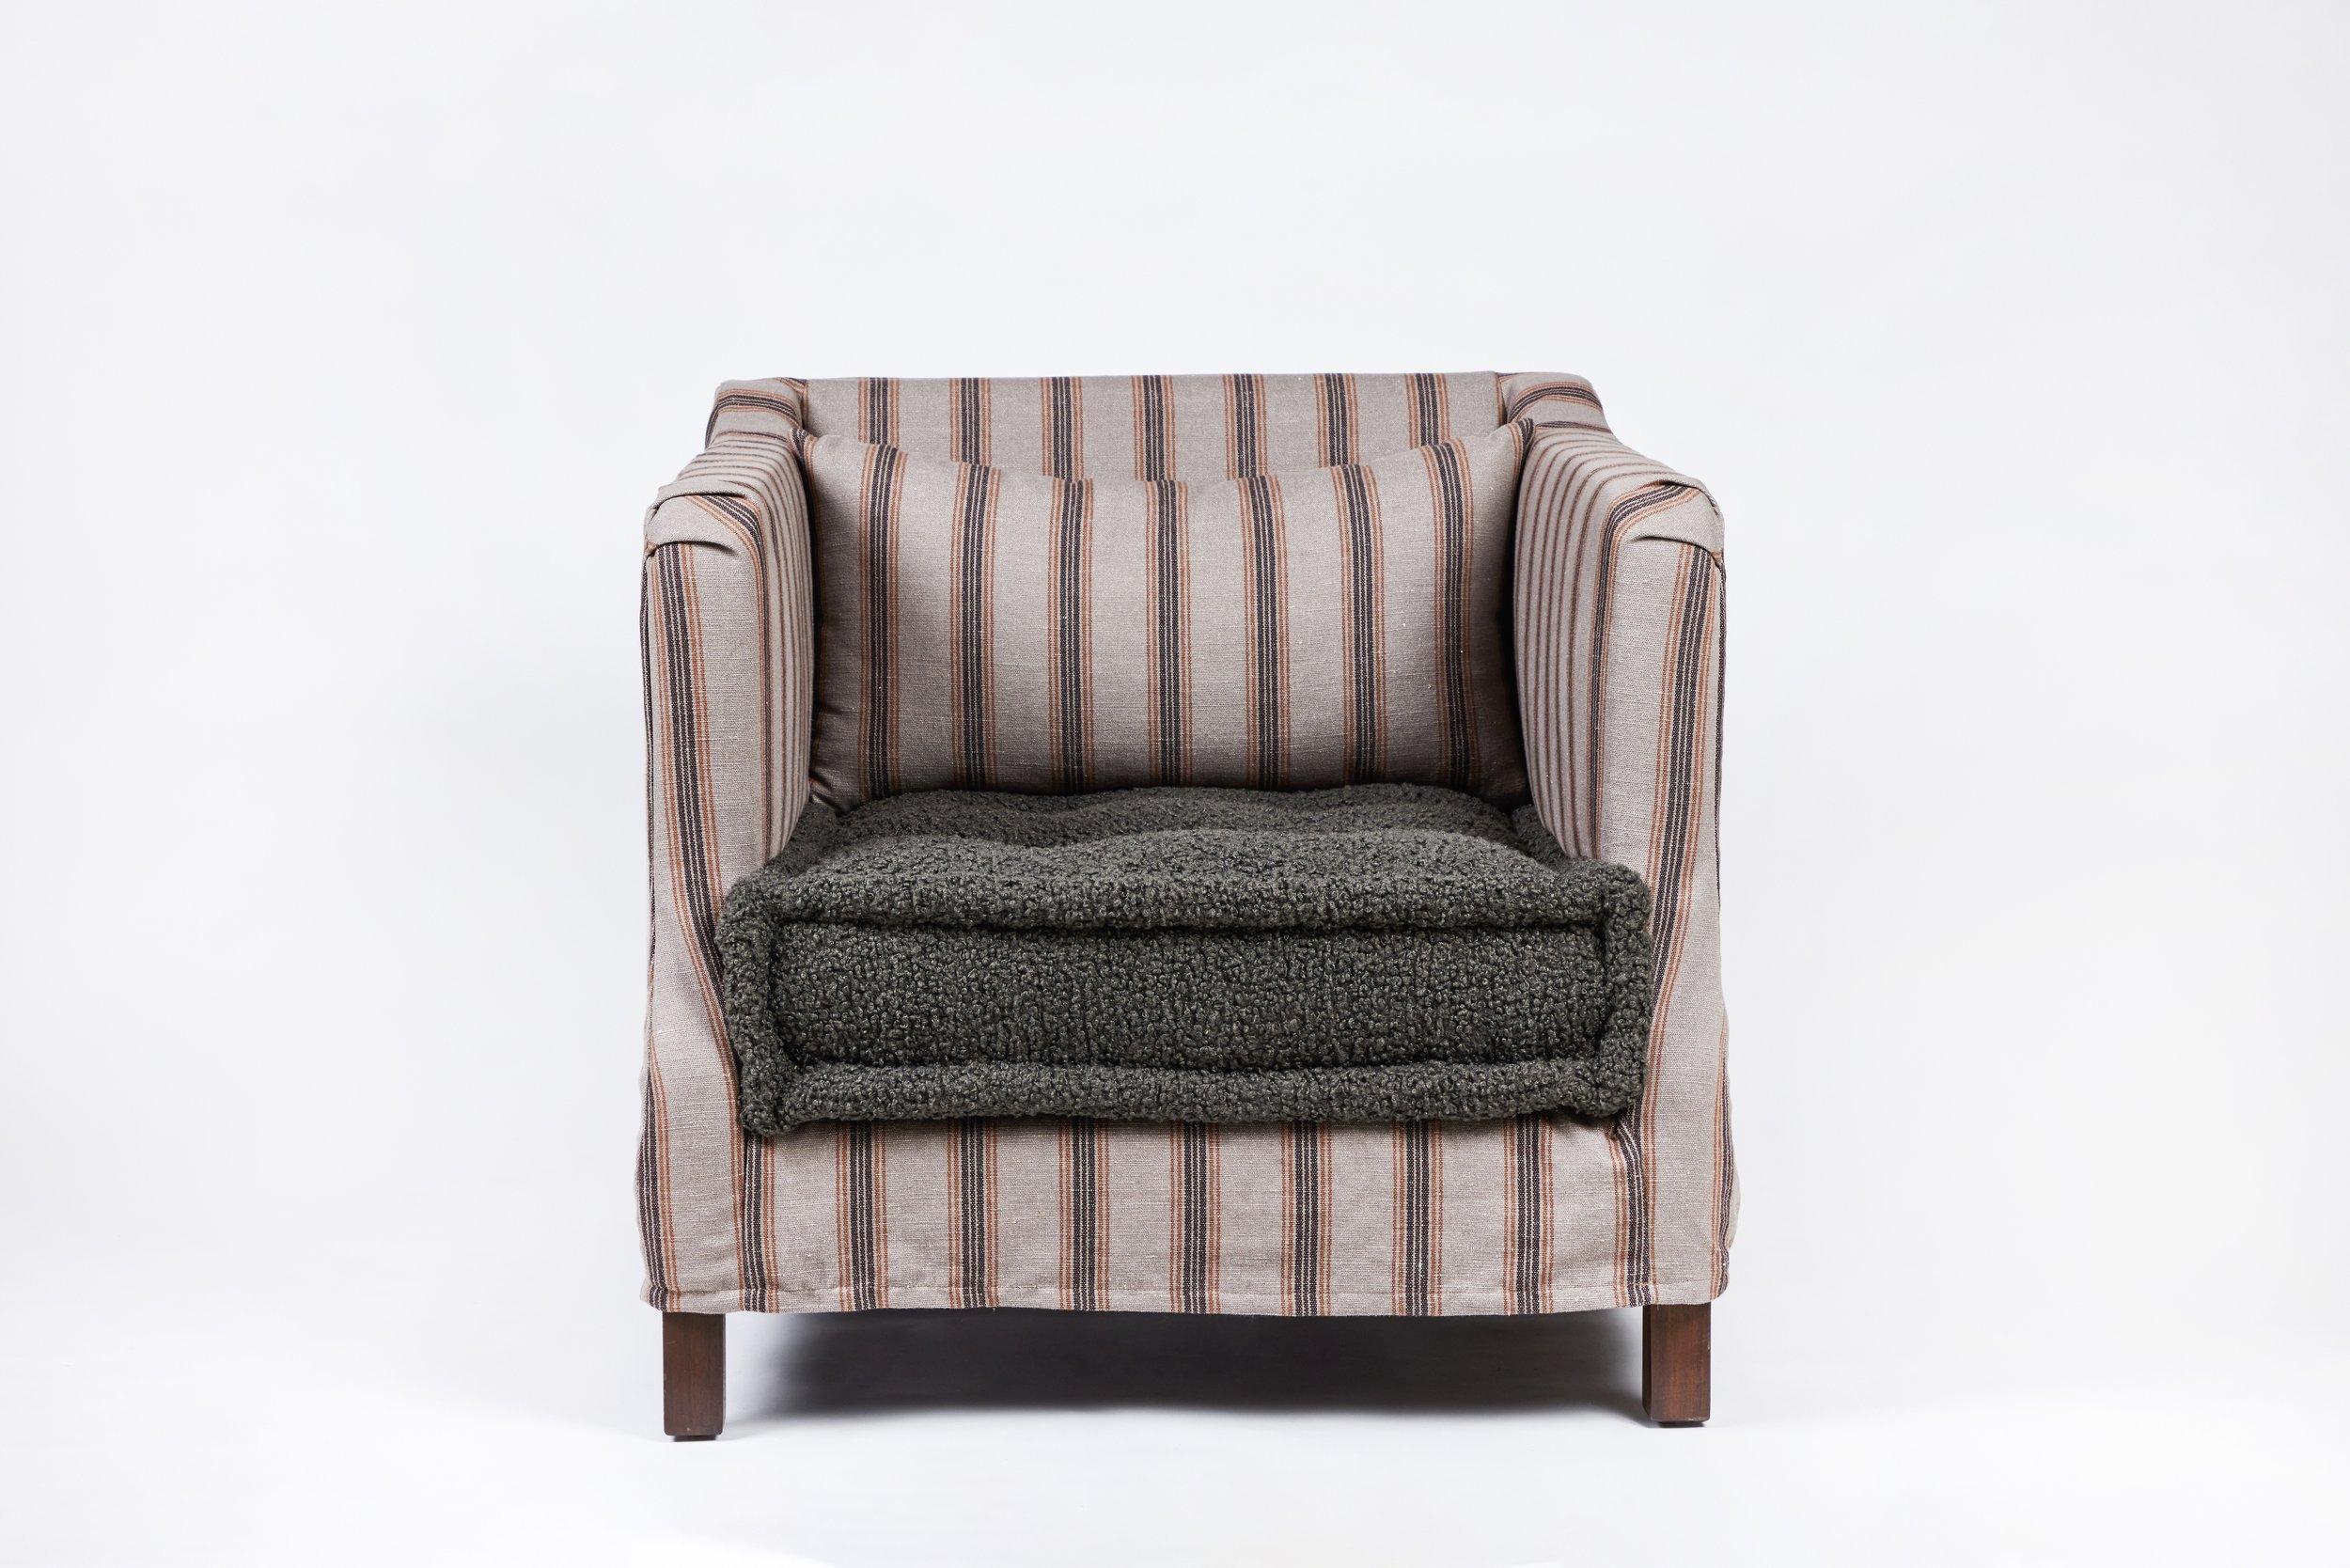 Martin & Brockett’s All Day Chair features a loose slipcover, loose back cushion and deep seat cushion- available for order in French style mattress or loose.

H 32 in. x W 34 in. x D 40 in. Seat Height 18”

Sold as C.O.M. only - 11 yards

Available